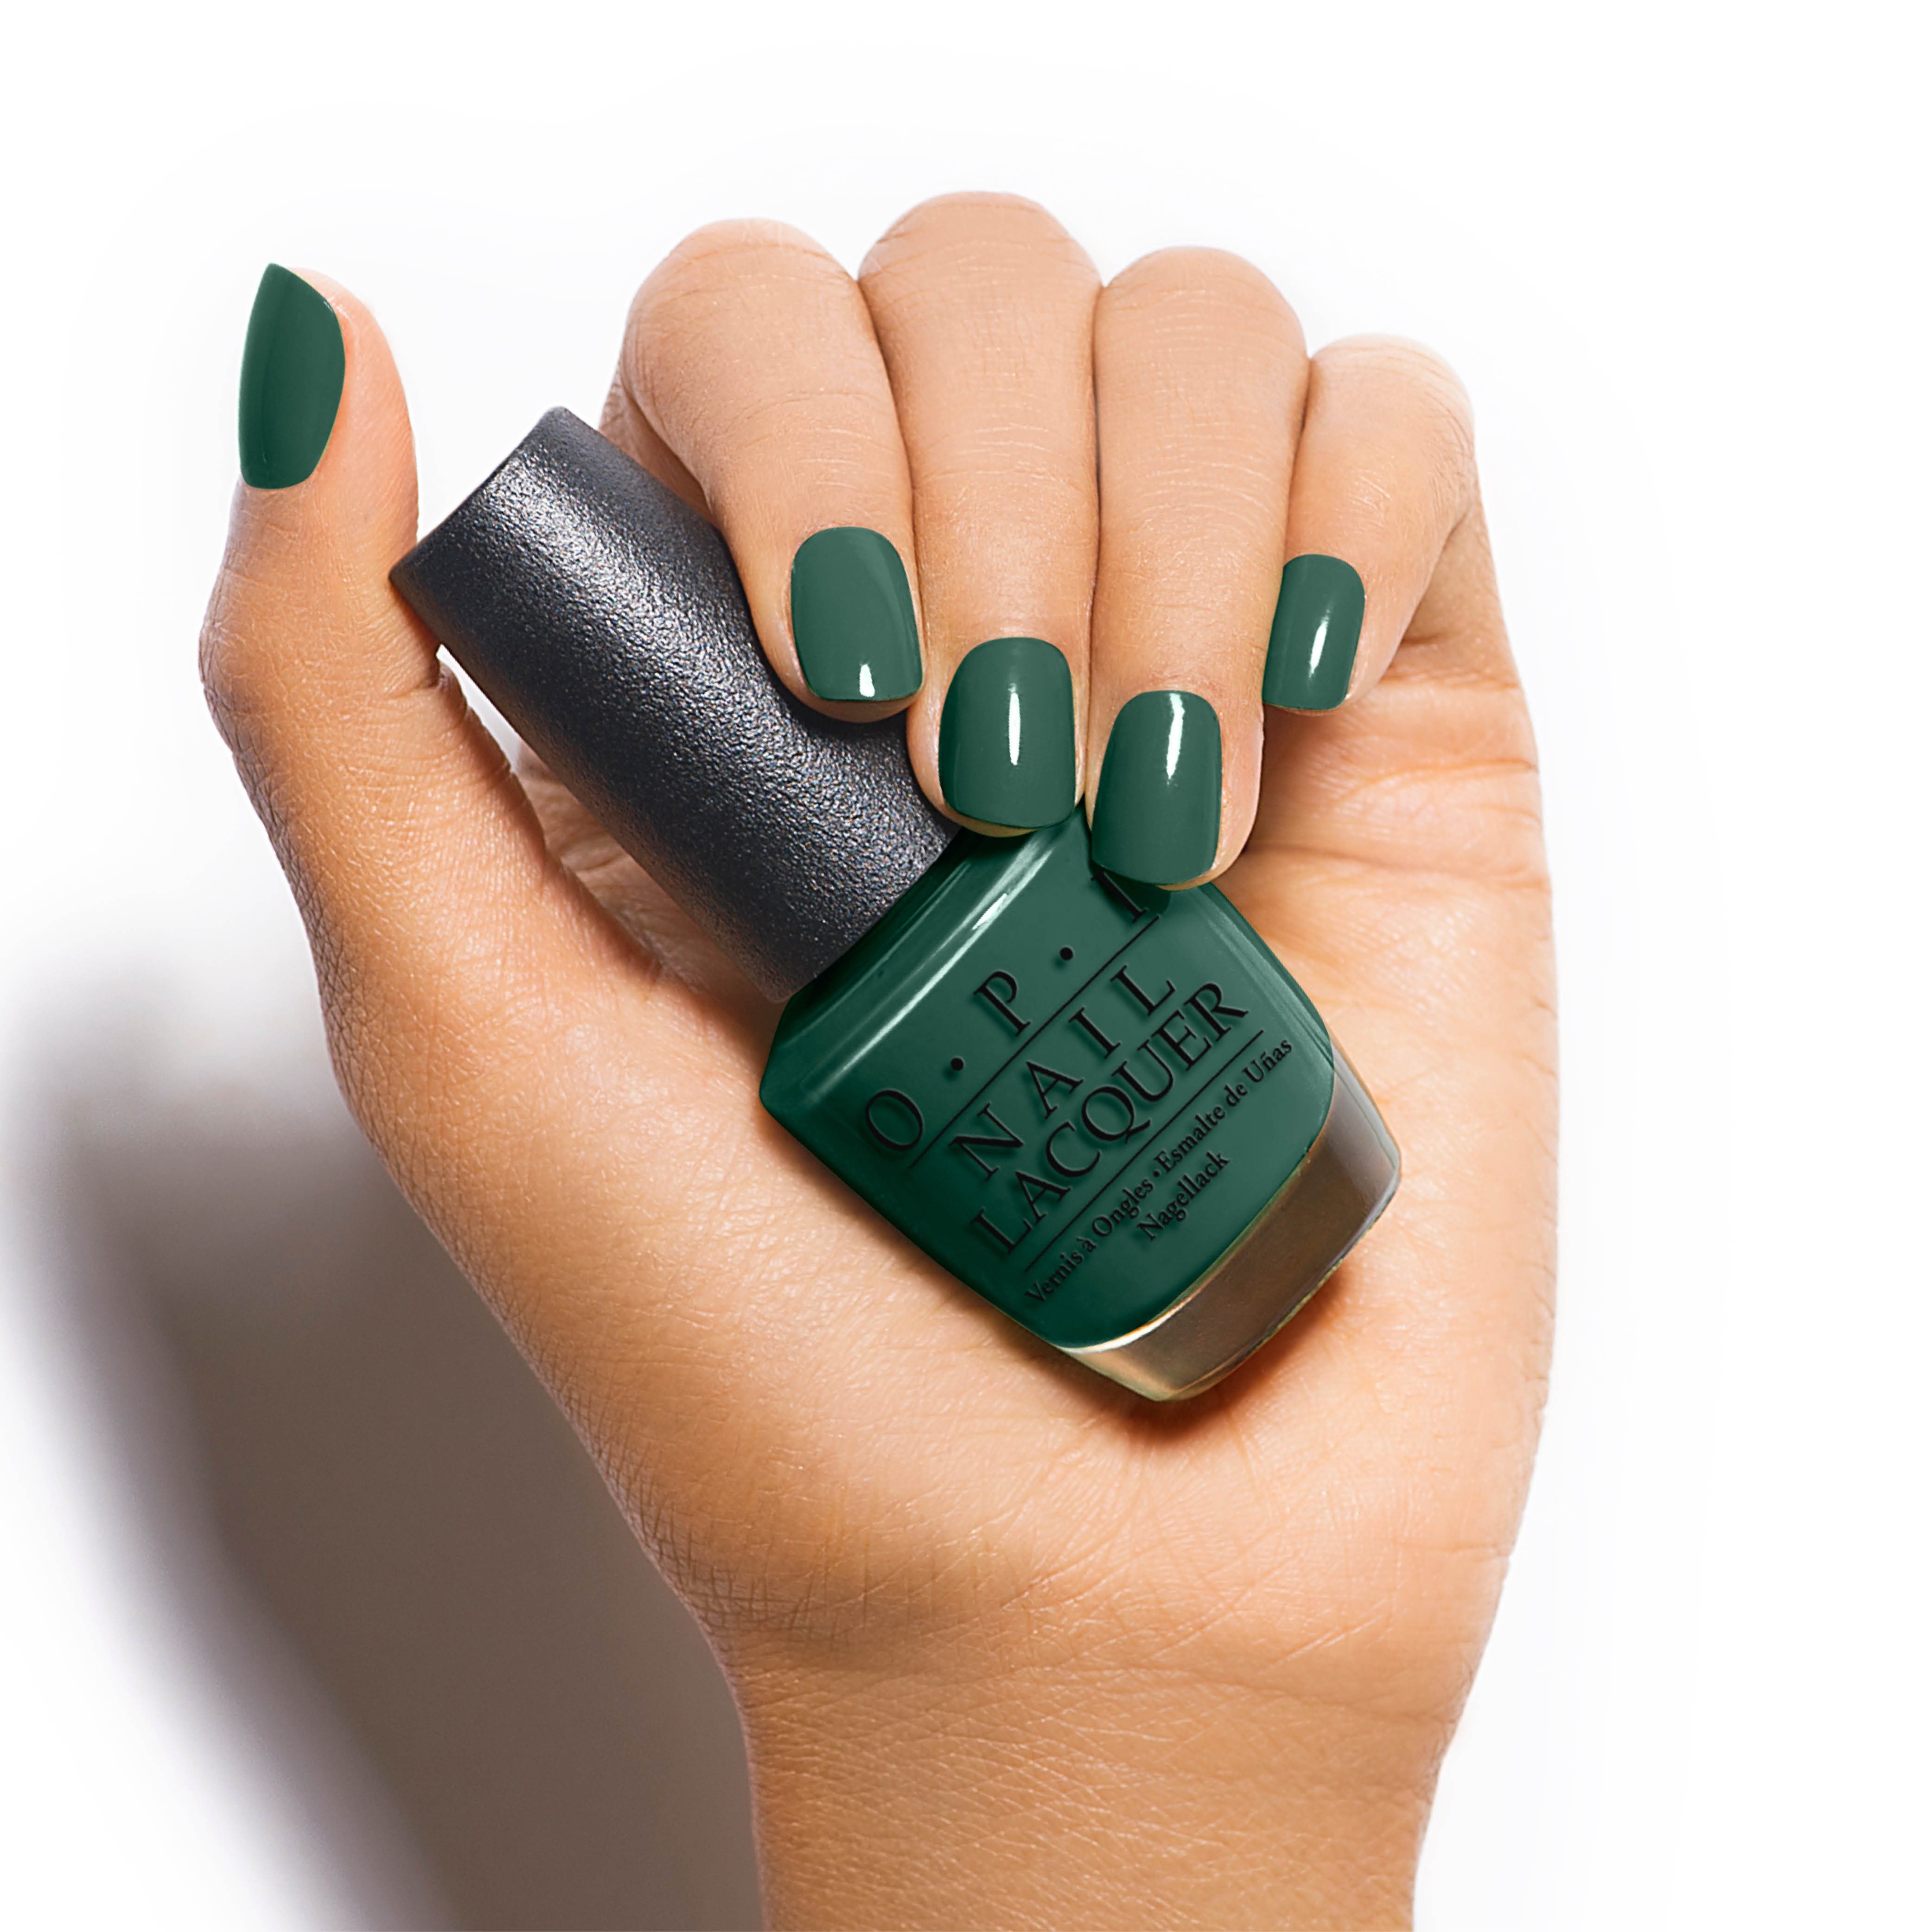 Stay Off the Lawn!! - Nail Lacquer | OPI